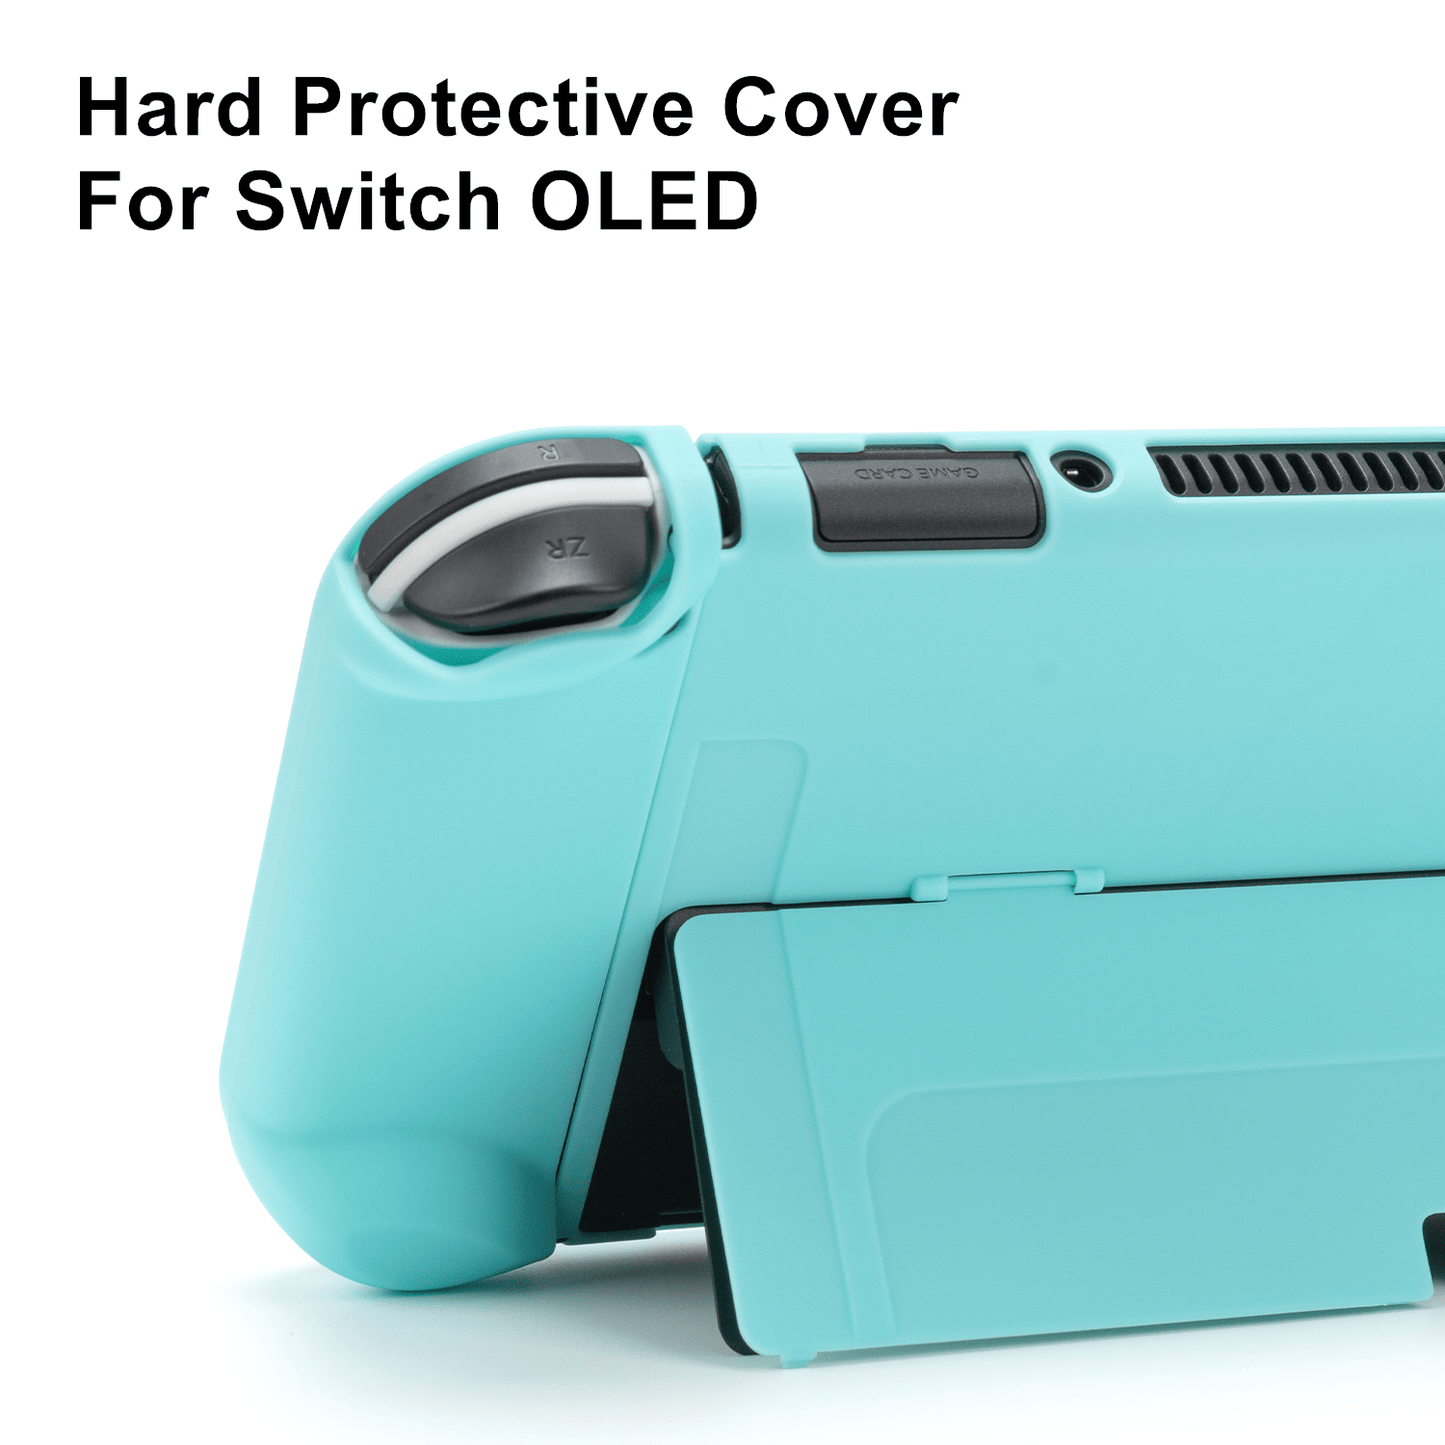 Solid Nintendo Switch OLED Protective Shell